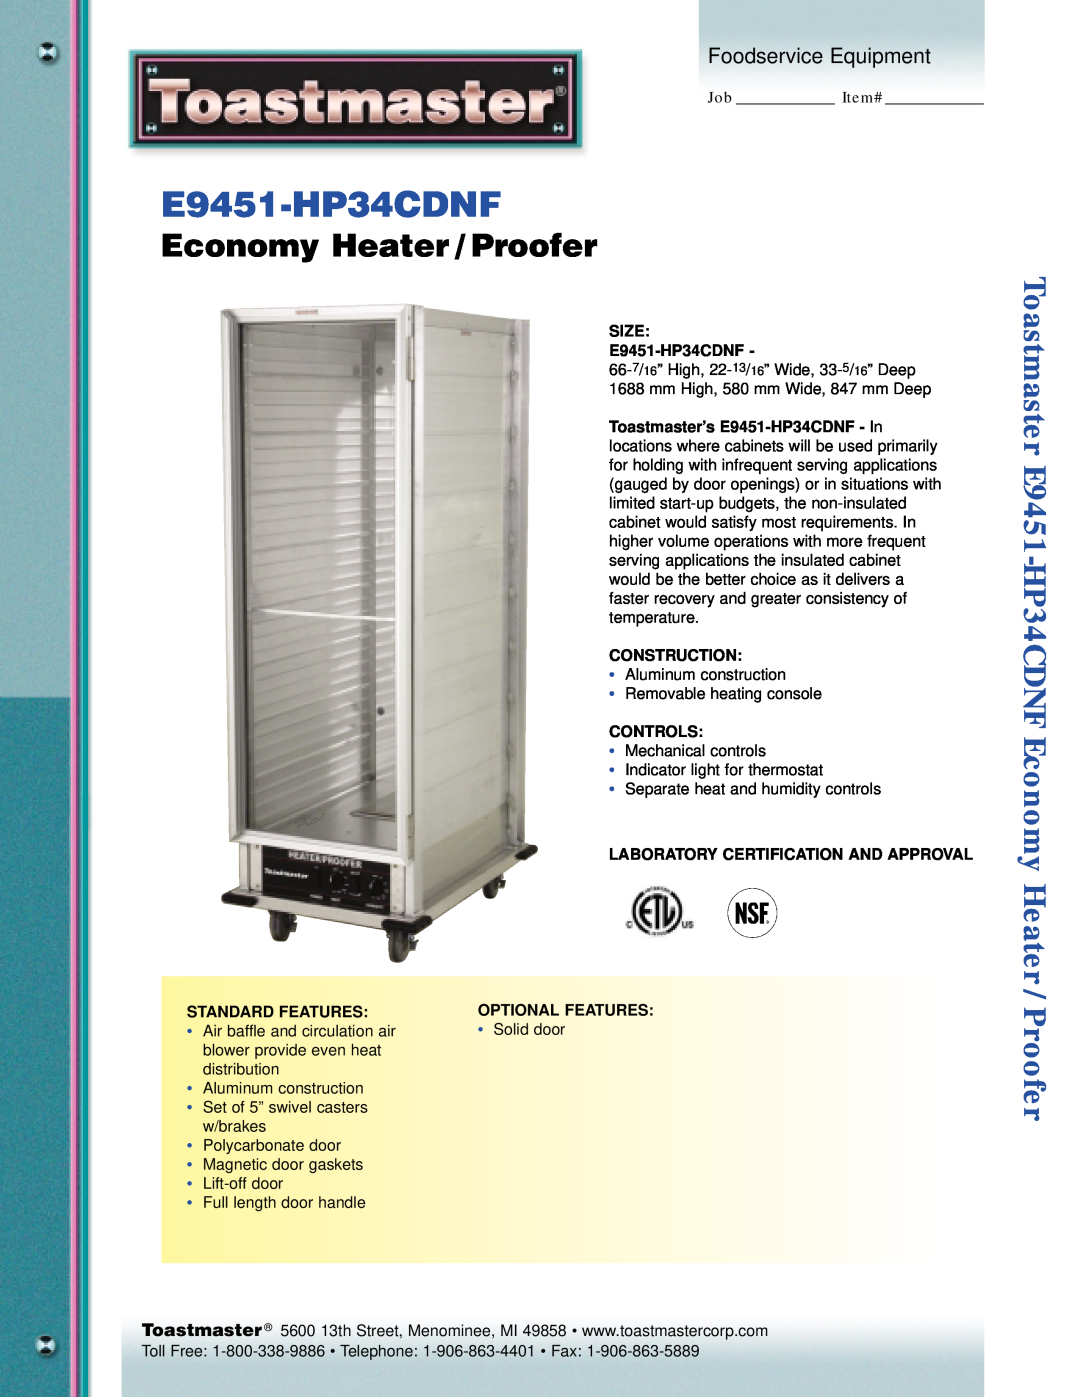 Toastmaster E9451-HP34CDNF manual Economy Heater / Proofer, Foodservice Equipment 